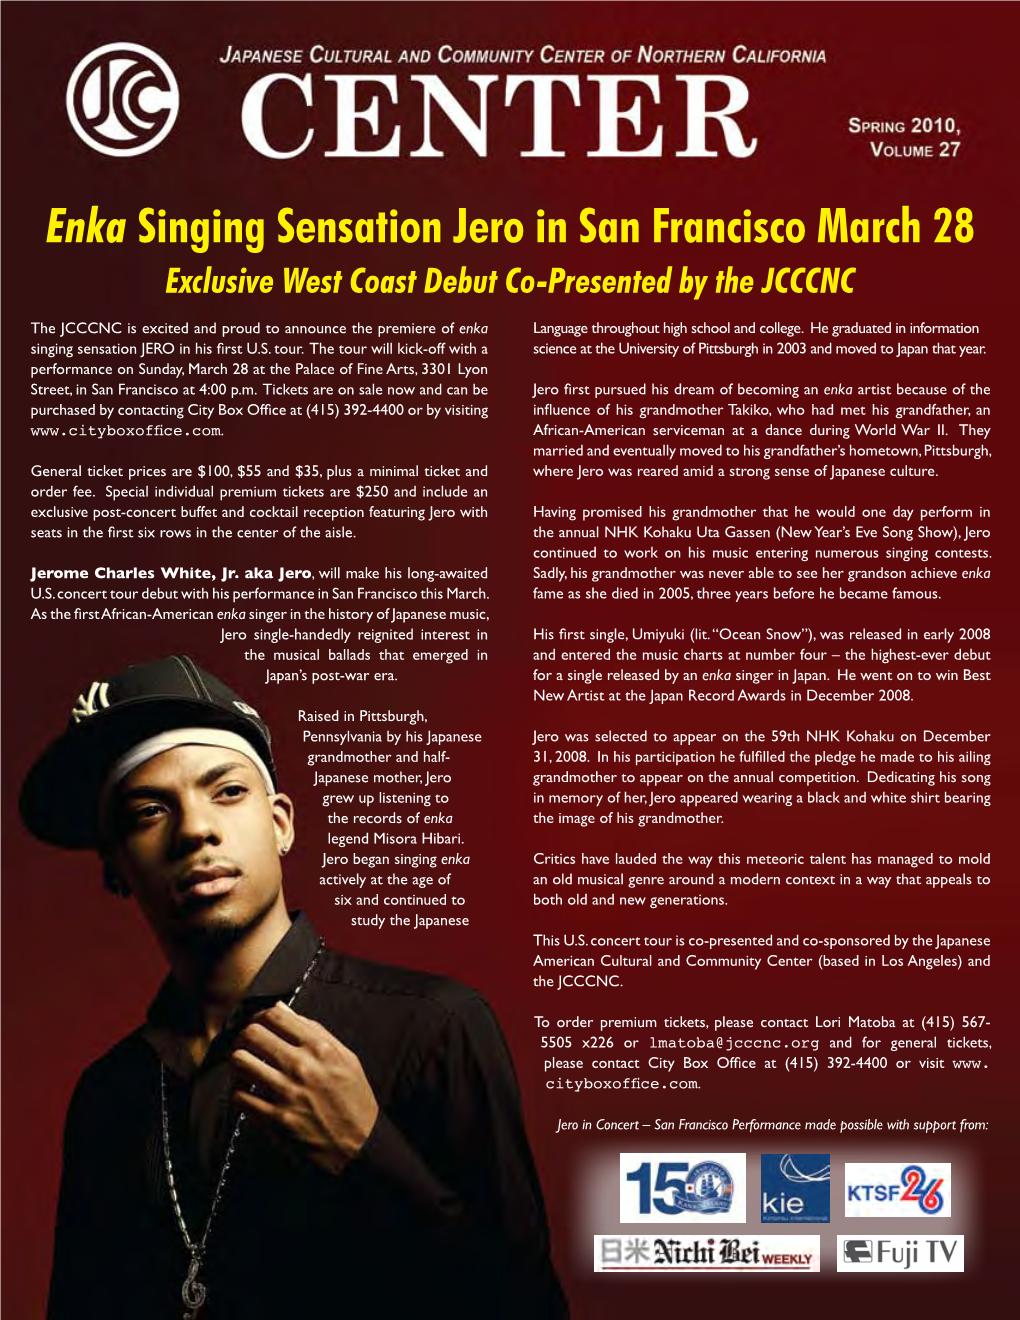 Enka Singing Sensation Jero in San Francisco March 28 Exclusive West Coast Debut Co-Presented by the JCCCNC